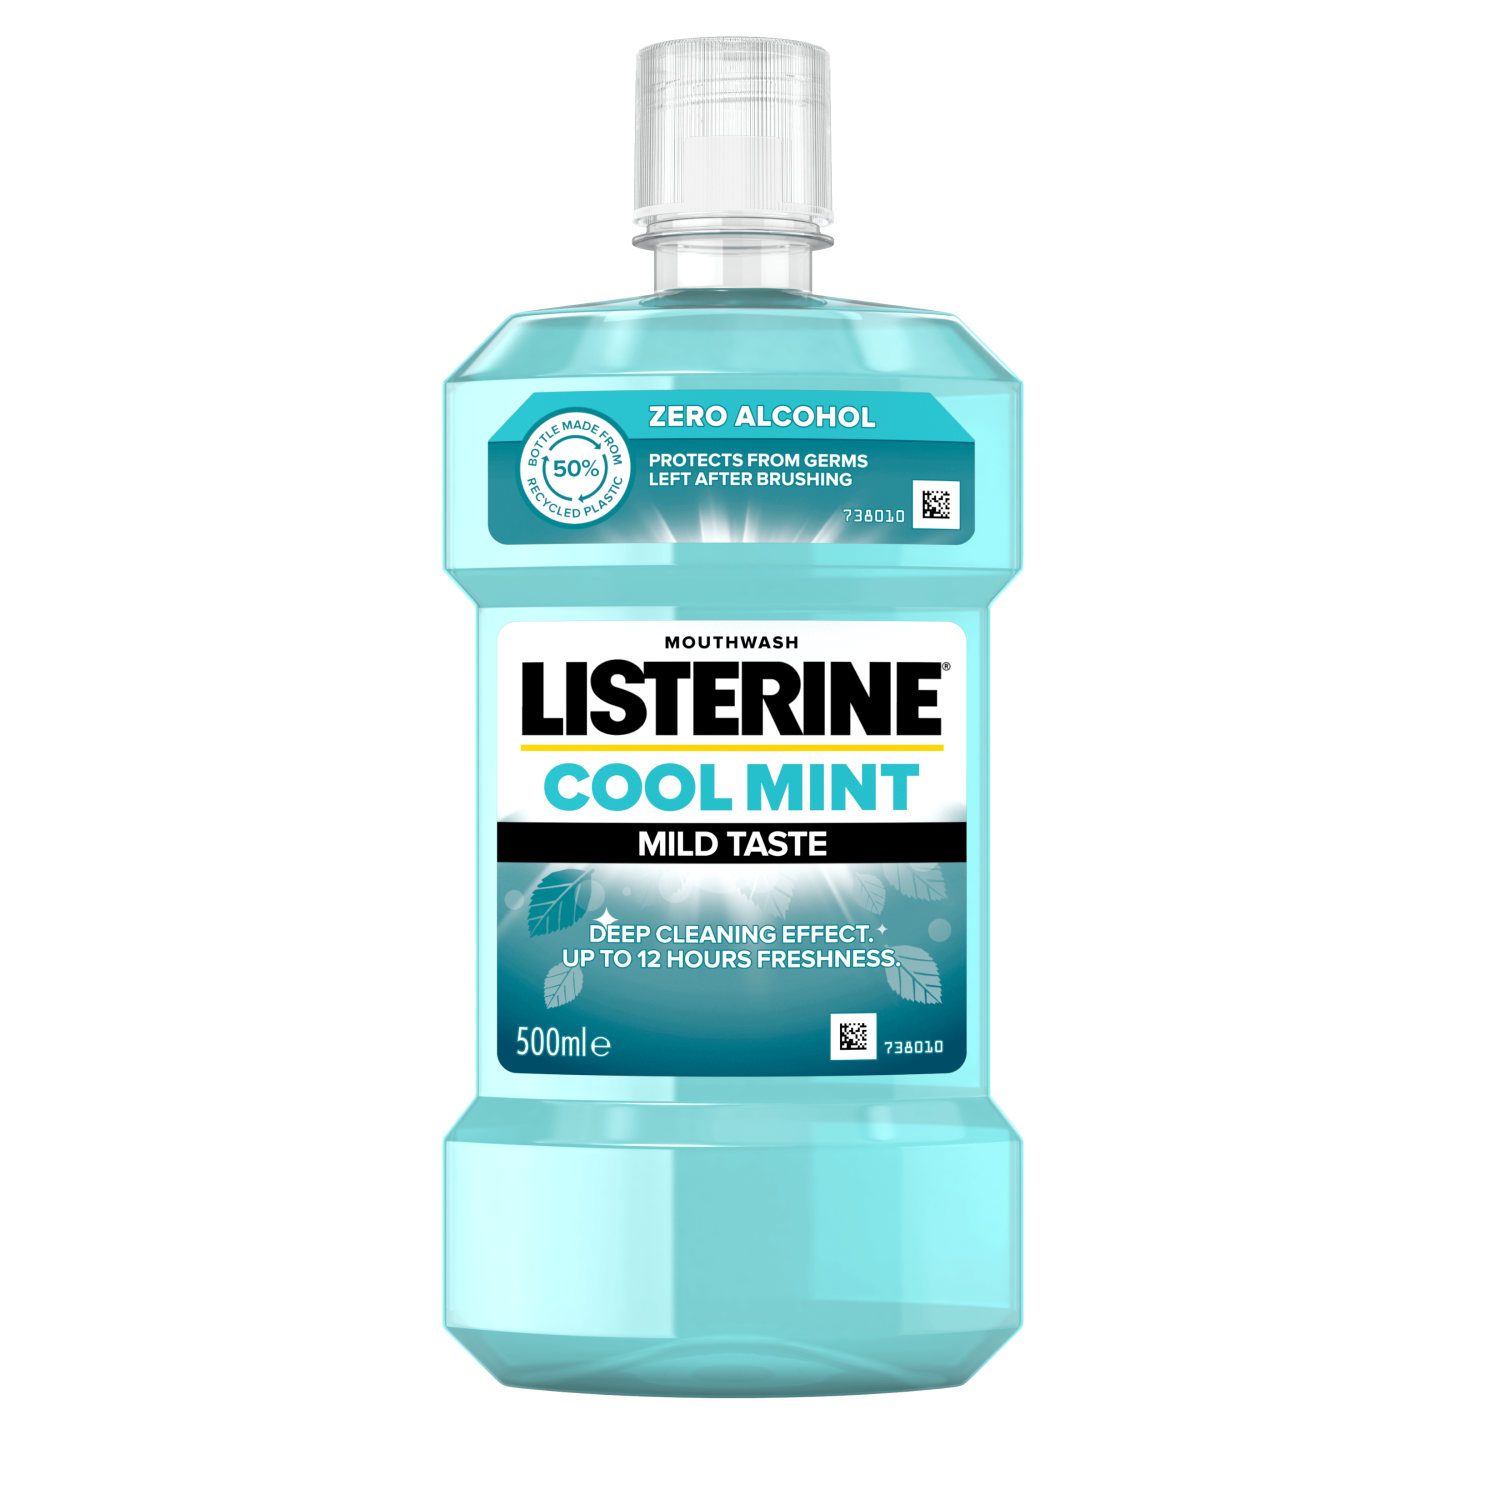 Listerine Cool Mint Mild Mint 500 ml termékfotó, Protects from Germs left after brushing és Deep Cleaning effect up to 12 hours freshness feliratokkal